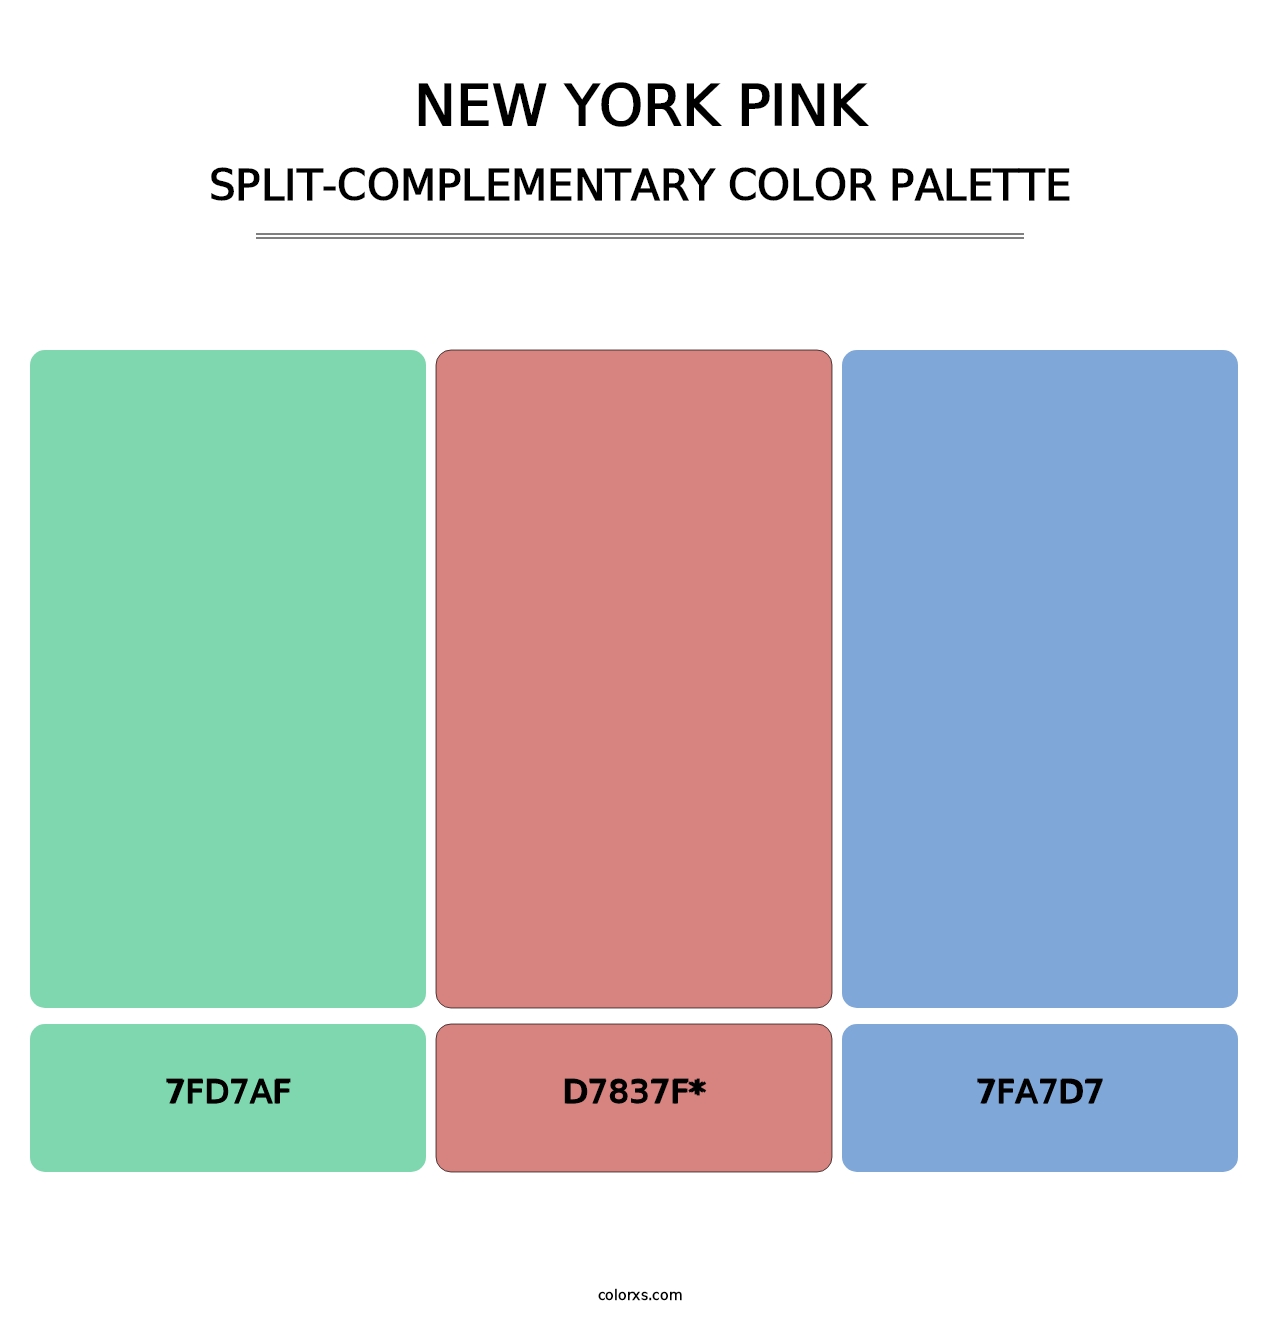 New York Pink - Split-Complementary Color Palette